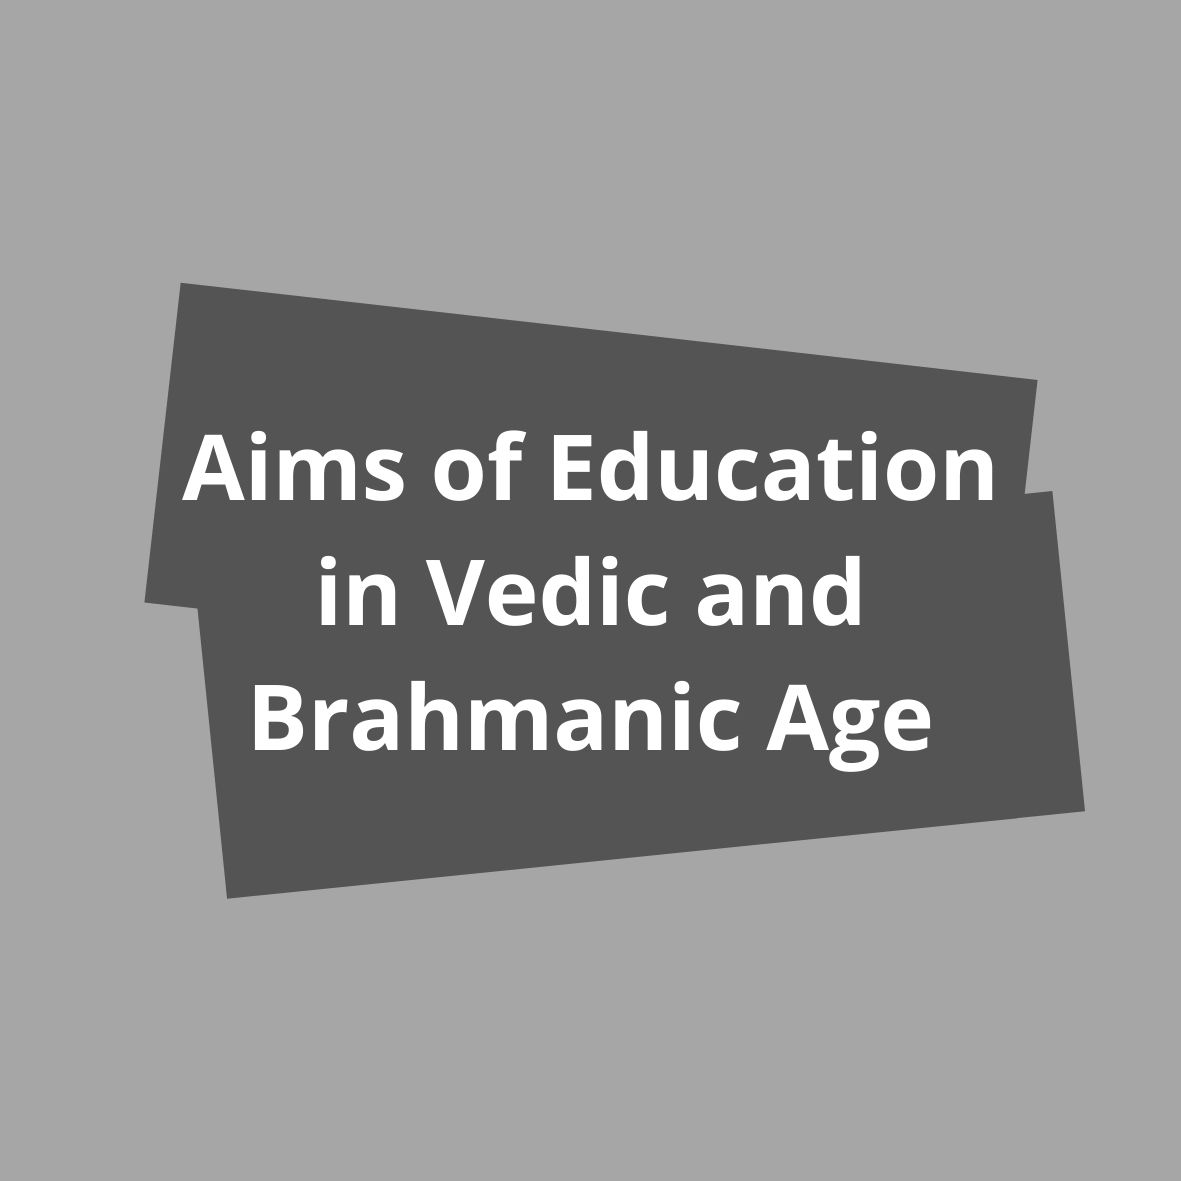 Aims of Education in Vedic and Brahmanic Age